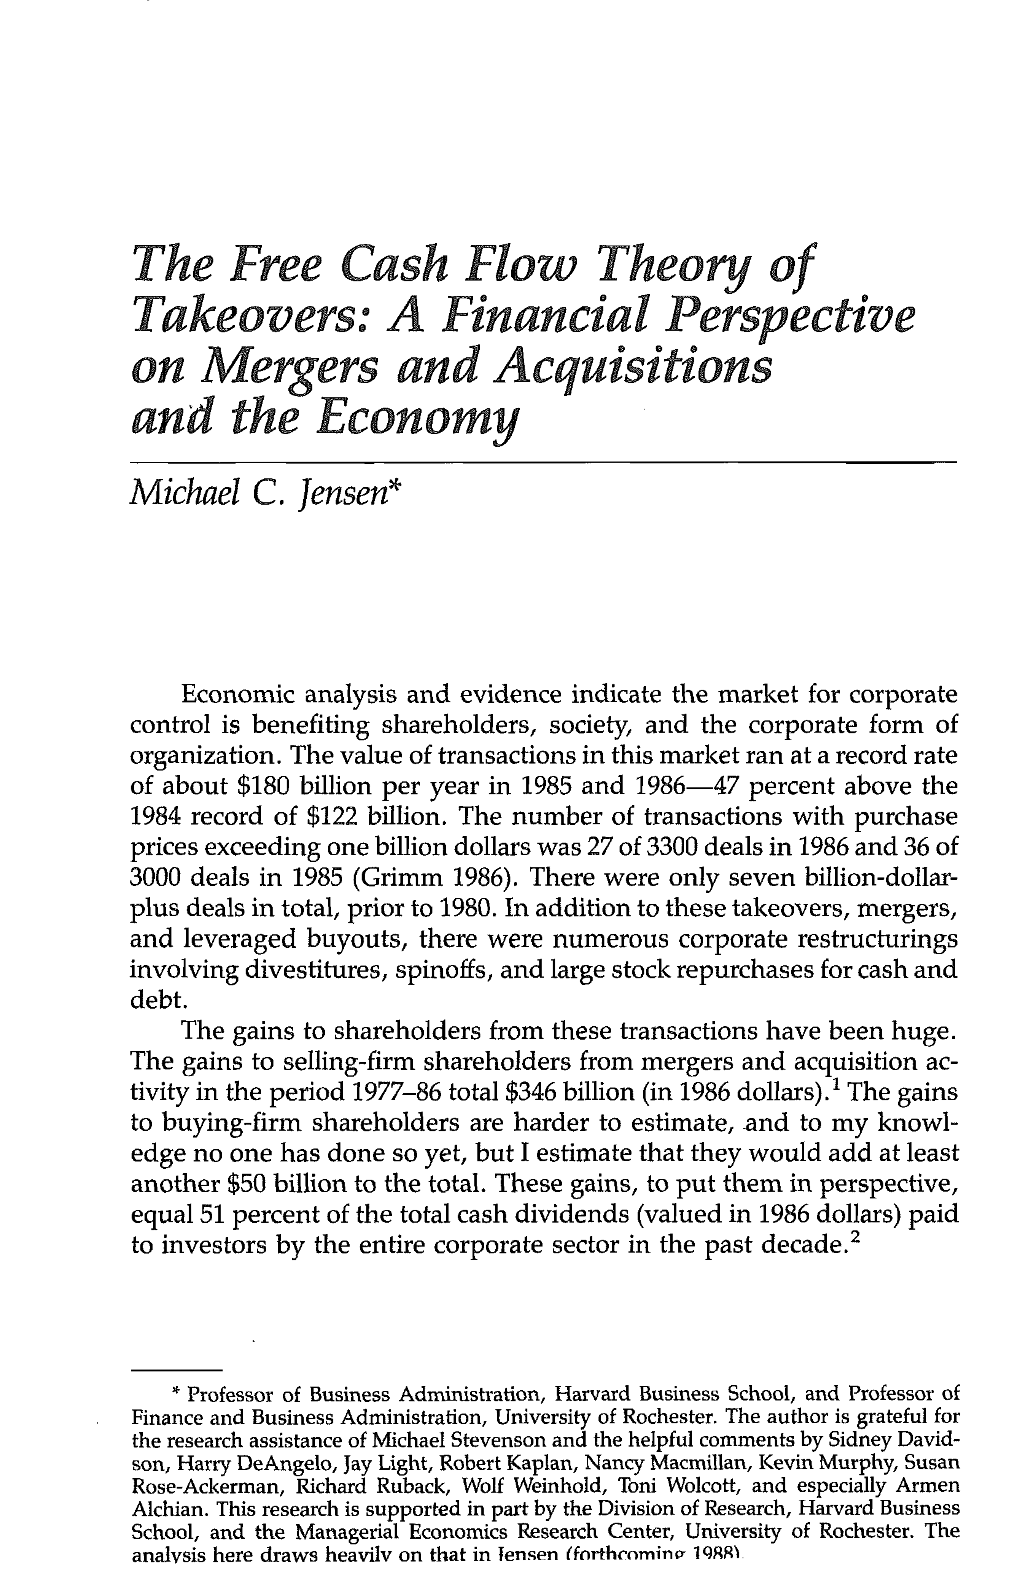 The Free Cash Flow Theory of Takeovers: a Financial Perspectfve on Met’Gets and Acq Uisitions and ~He Economy Michael C